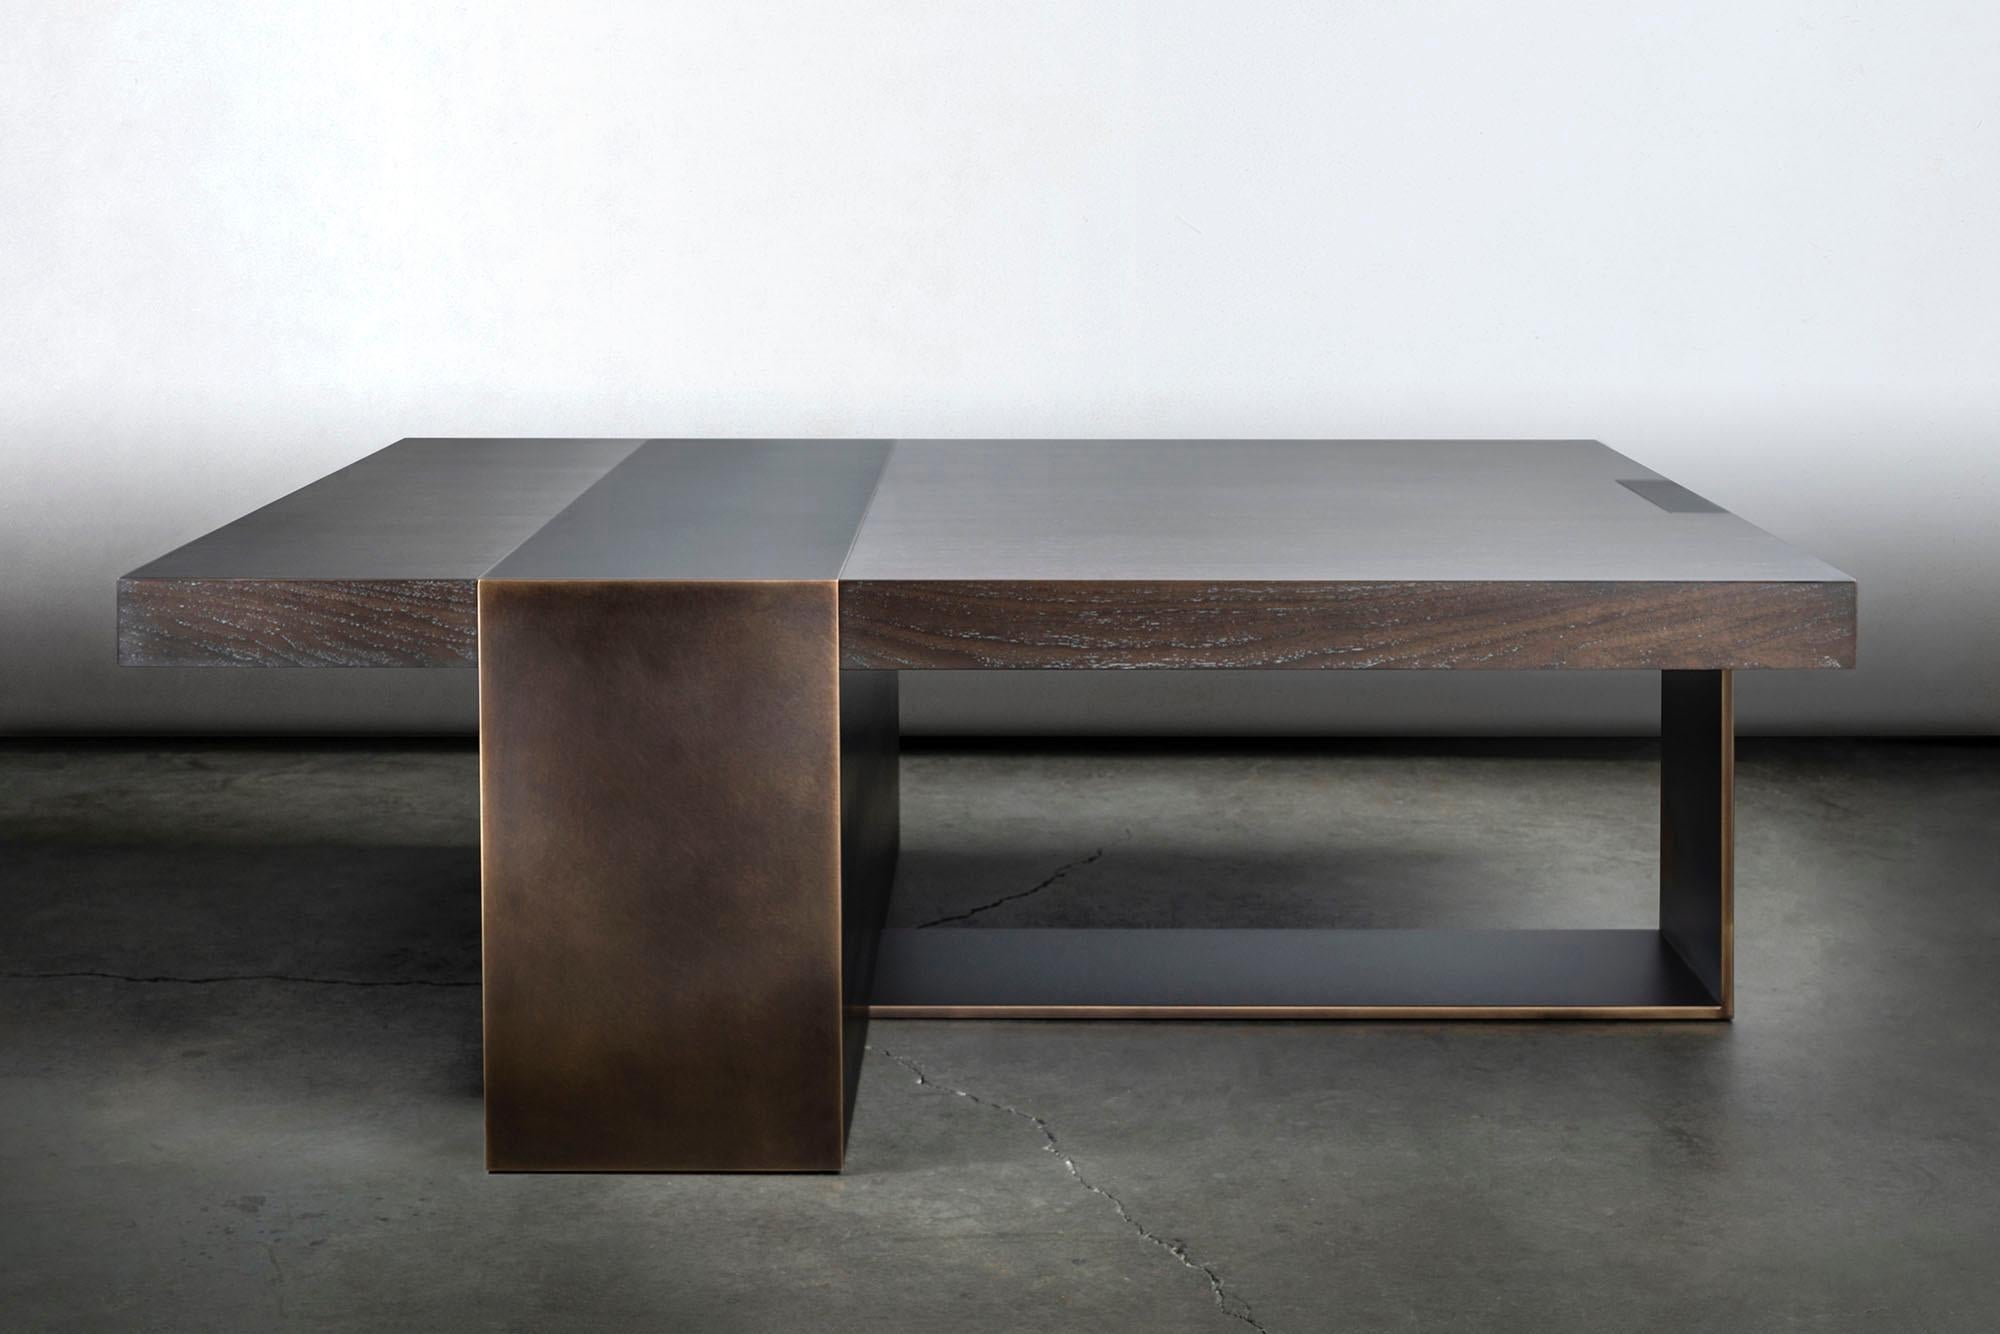 The LUMA design workshop strap coffee table is the result of thoughtful design and expert craftsmanship. The fumed oakwood top is held up by a dark bronze finished metal base.

Like all LUMA furniture, this piece is made to order, and can be